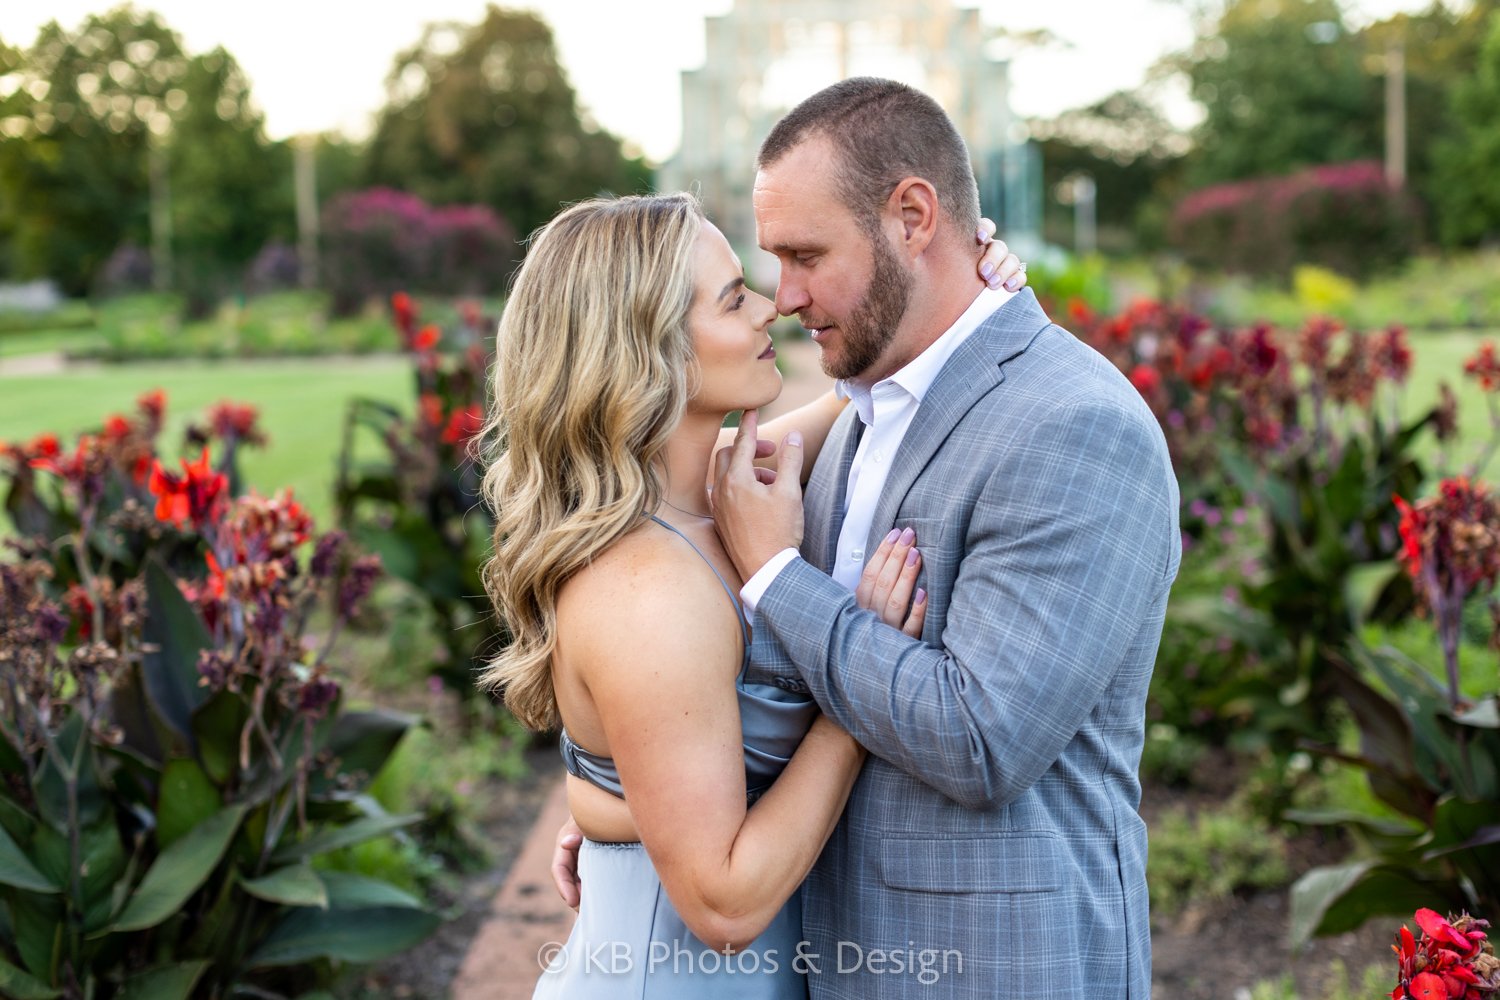 Taylor Drew engagement photography at St Louis Missouri STL Jewel Box in Forest Park with best engagement wedding photographer KB Photos and Design of St. Louis Chesterfield Missouri